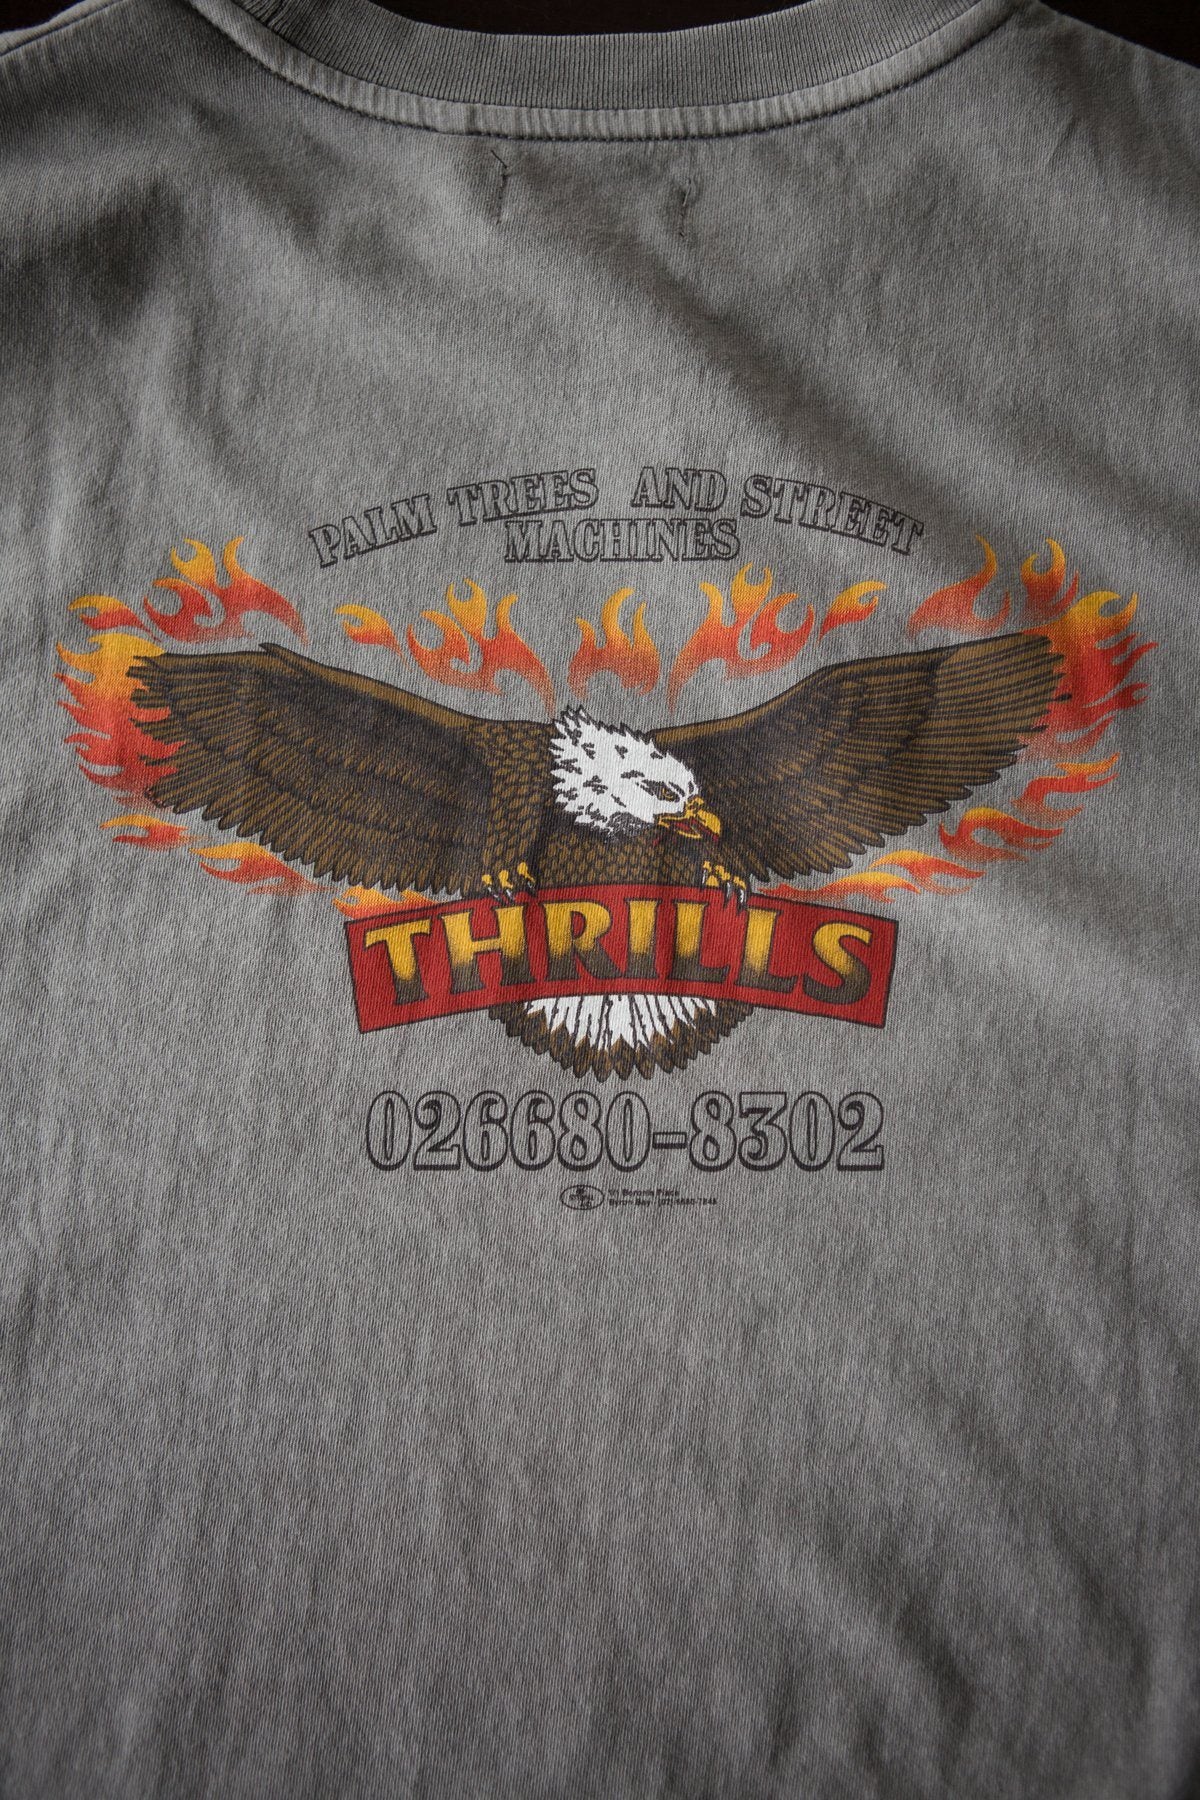 Wings of Fire Crop LS Merch Fit Tee - Washed Grey